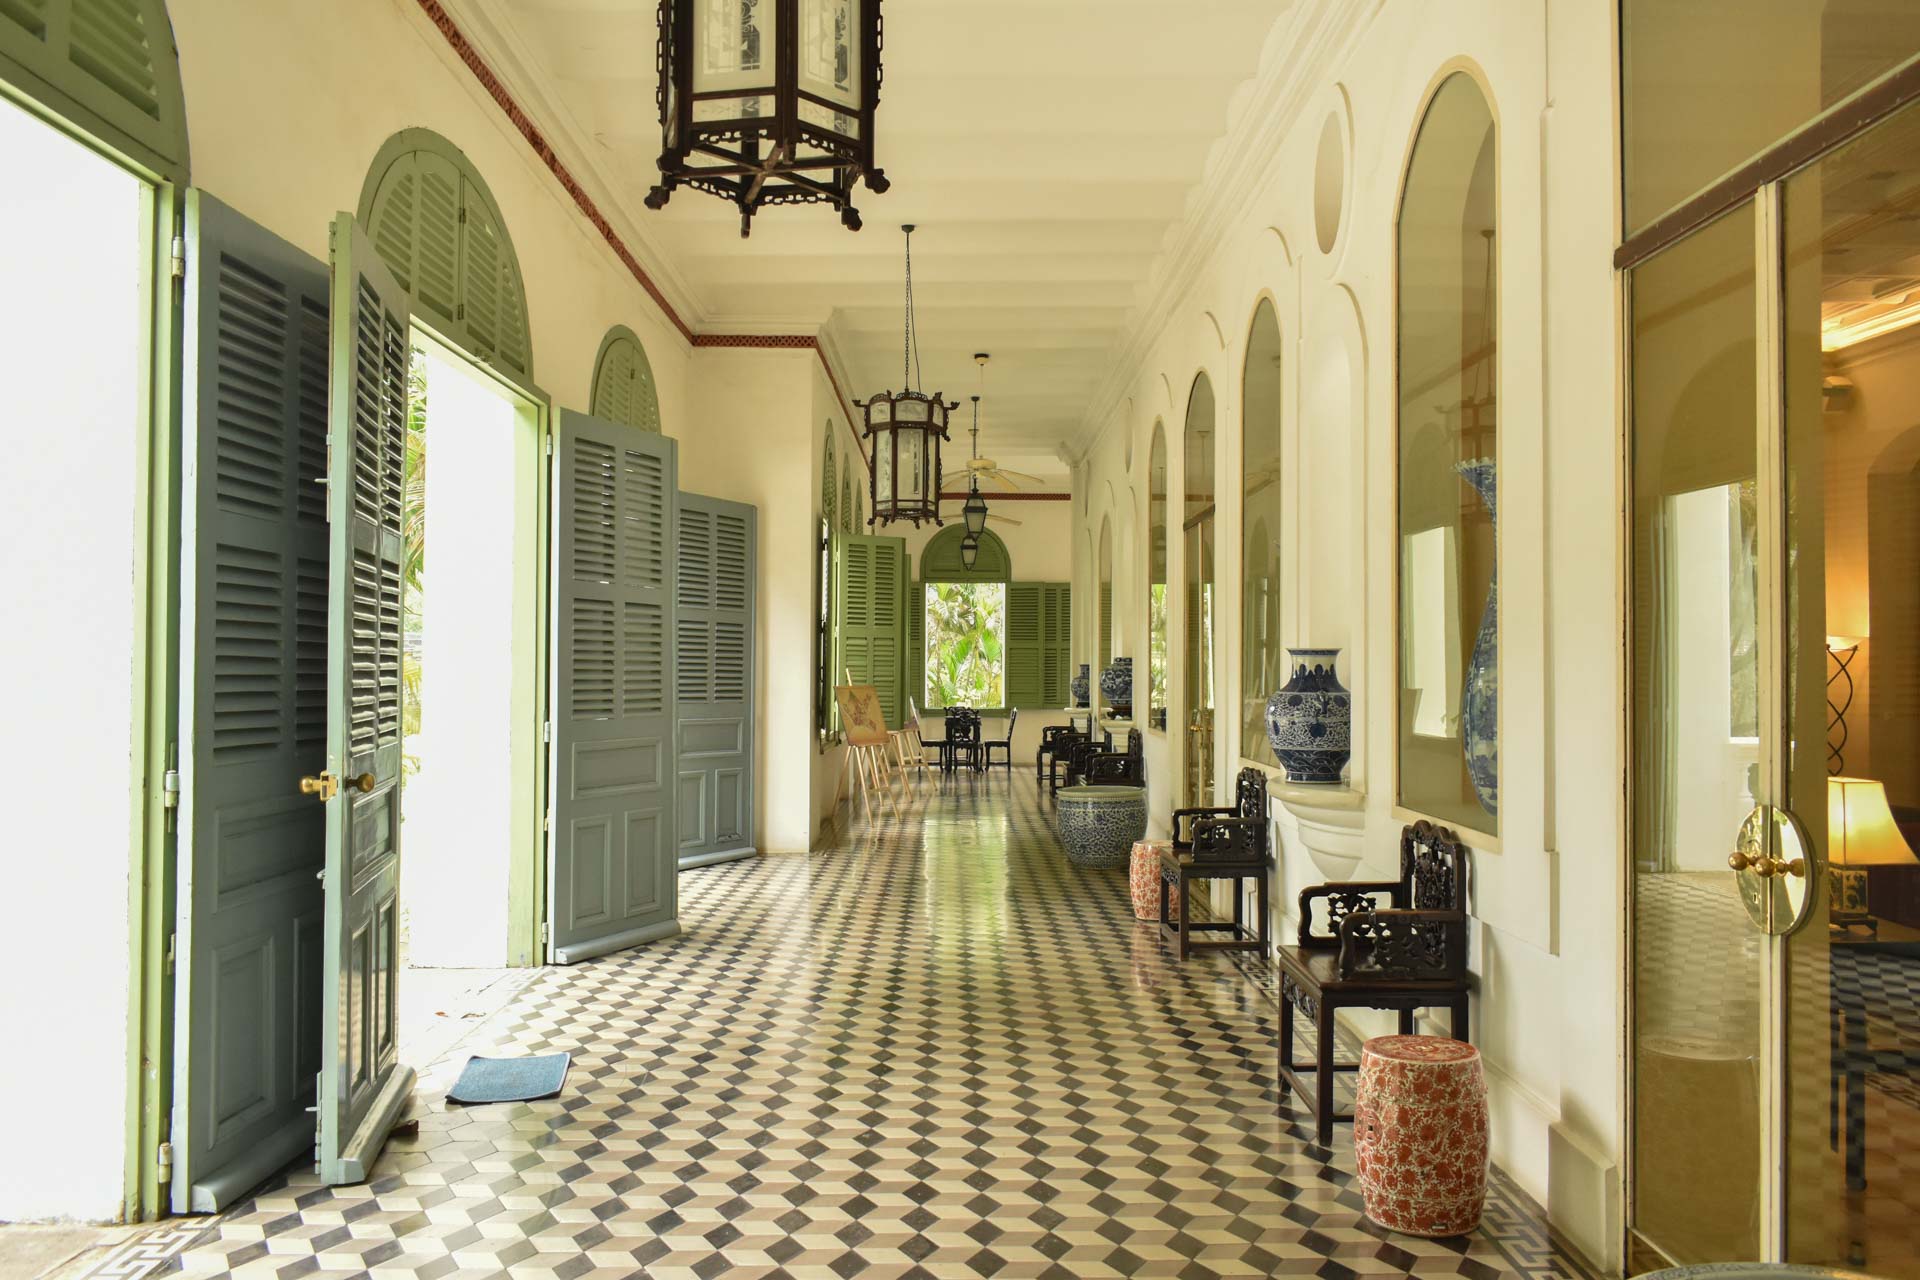 A hallway inside the Consulate General of France in Ho Chi Minh City. Photo: Tuan Son / Tuoi Tre News